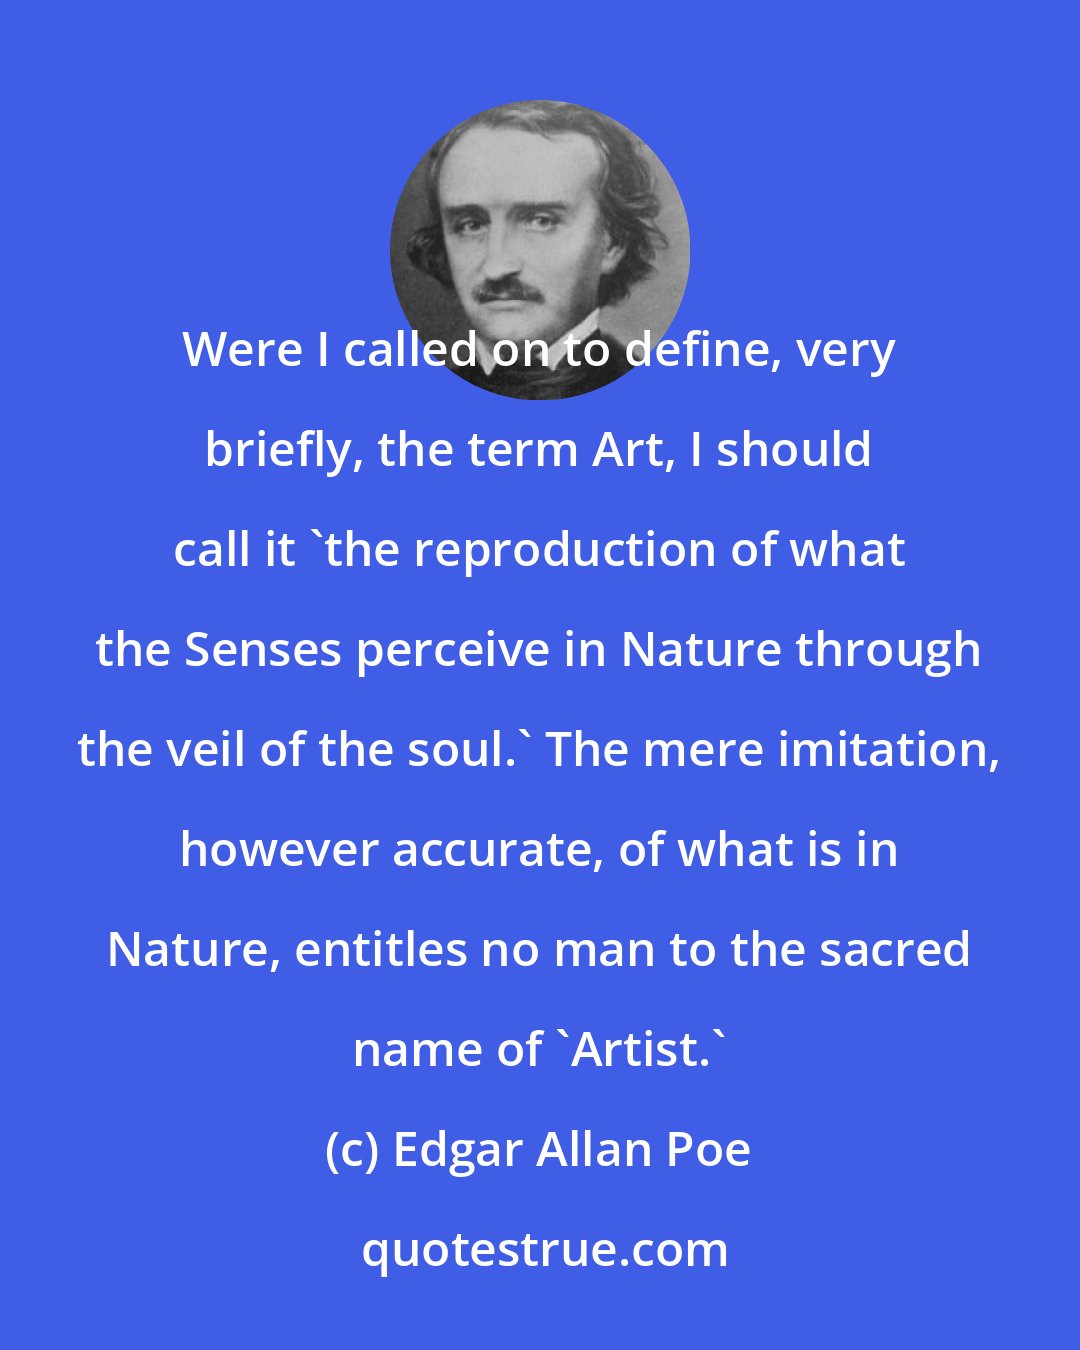 Edgar Allan Poe: Were I called on to define, very briefly, the term Art, I should call it 'the reproduction of what the Senses perceive in Nature through the veil of the soul.' The mere imitation, however accurate, of what is in Nature, entitles no man to the sacred name of 'Artist.'